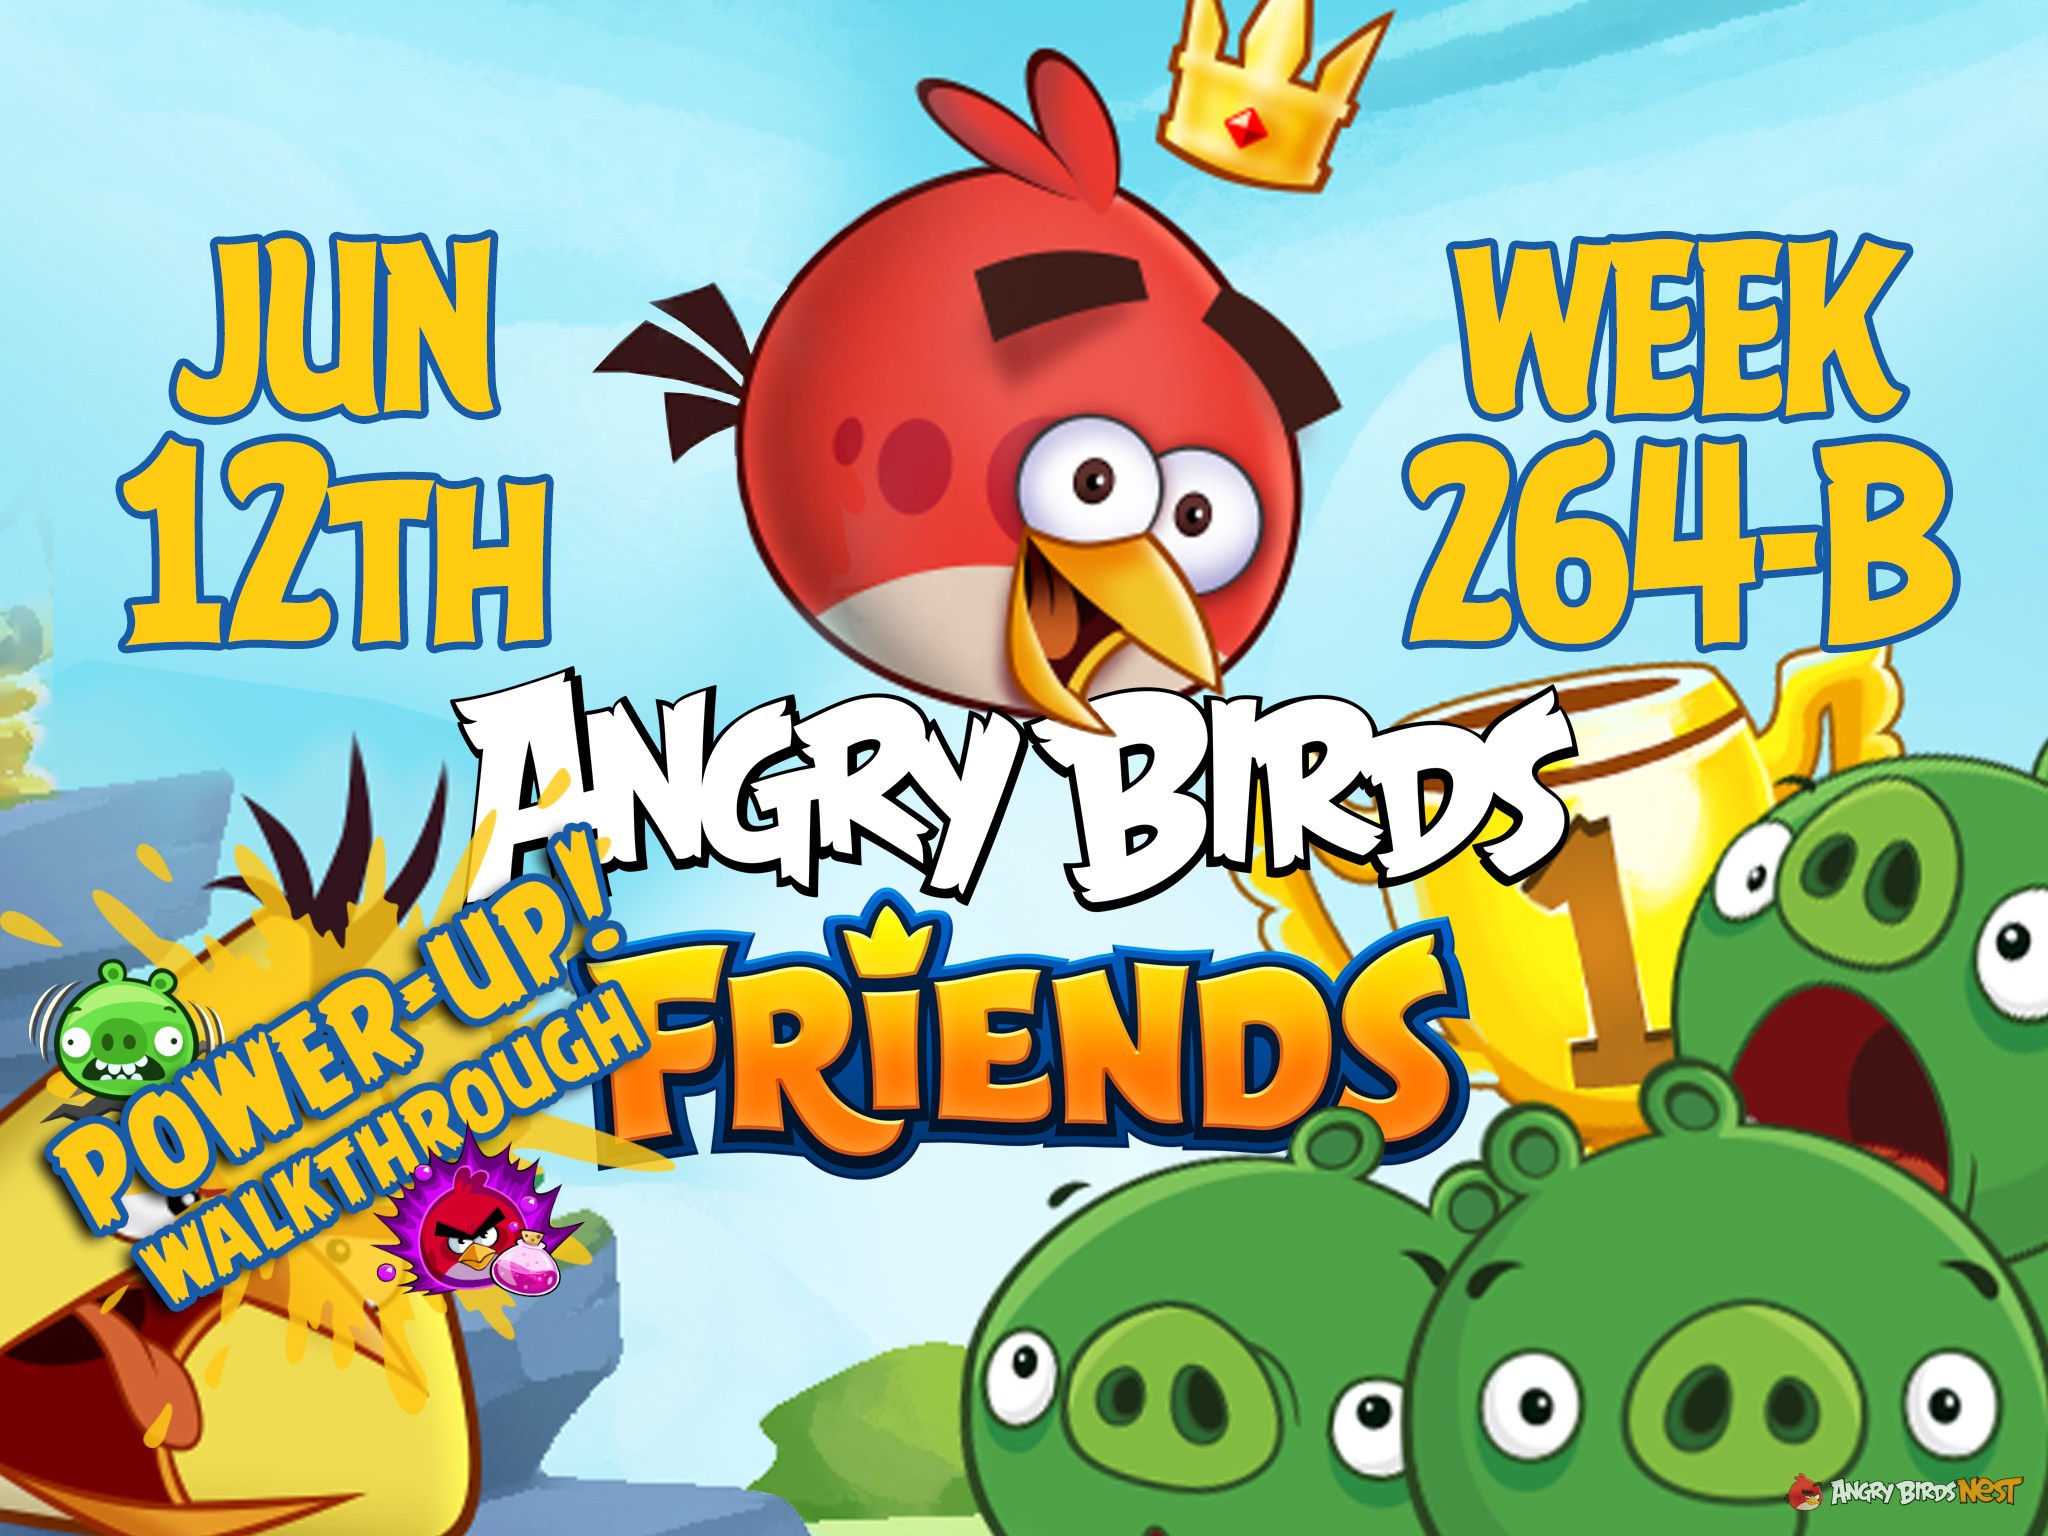 Angry Birds Friends Tournament Week 264-B Feature Image PU